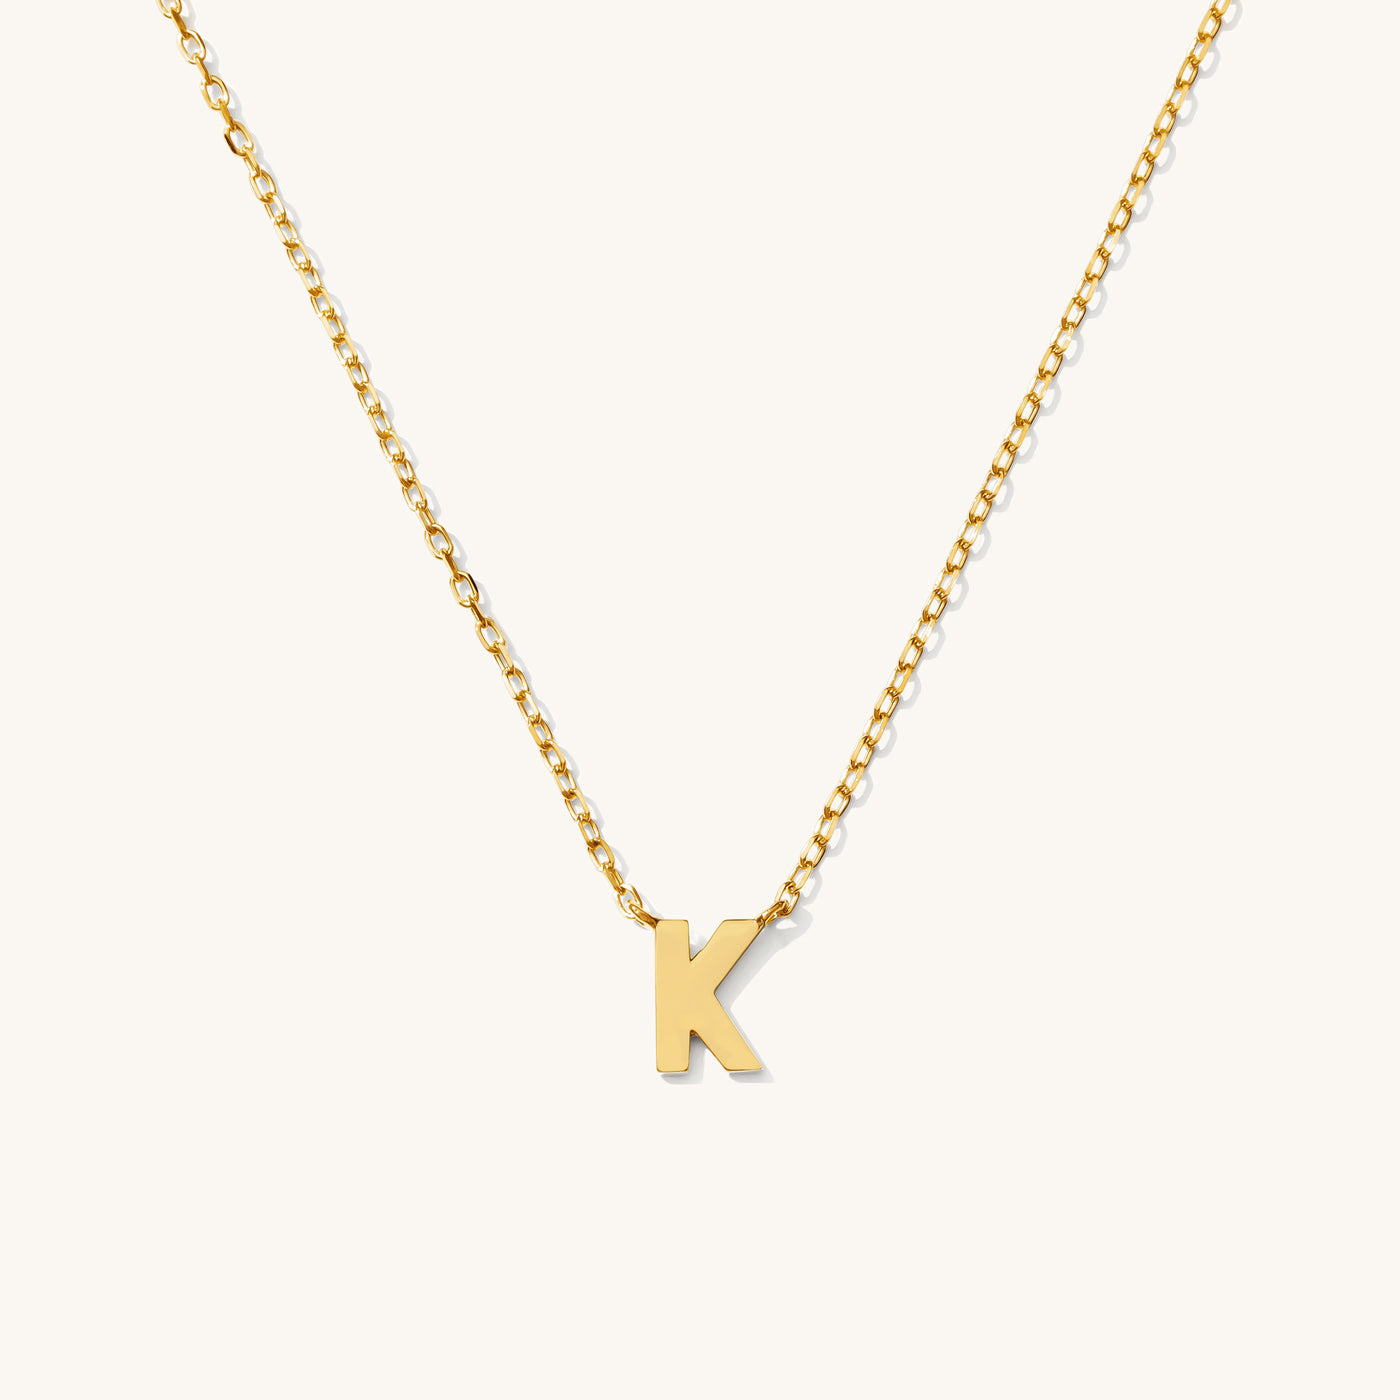 K Tiny Initial Necklace - 14k Solid Gold